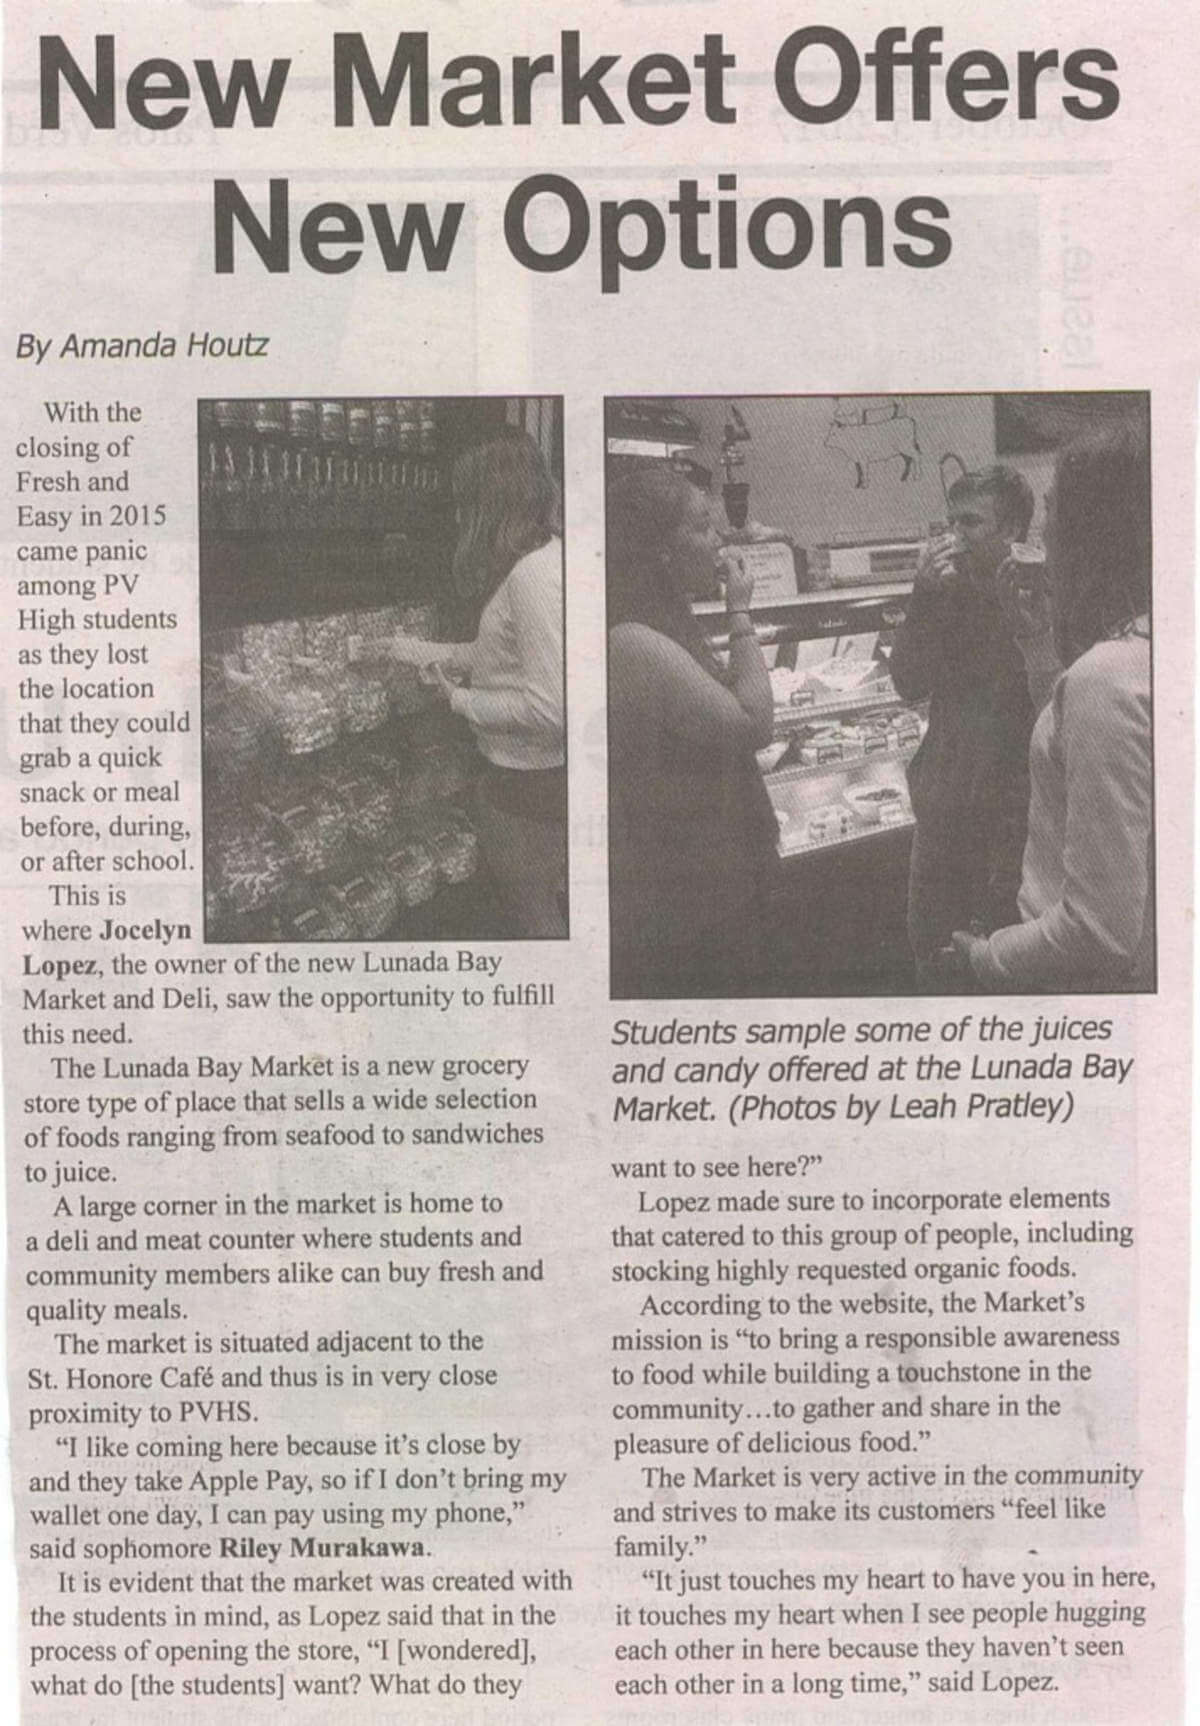 'New Market Offers New Options' scanned newspaper article